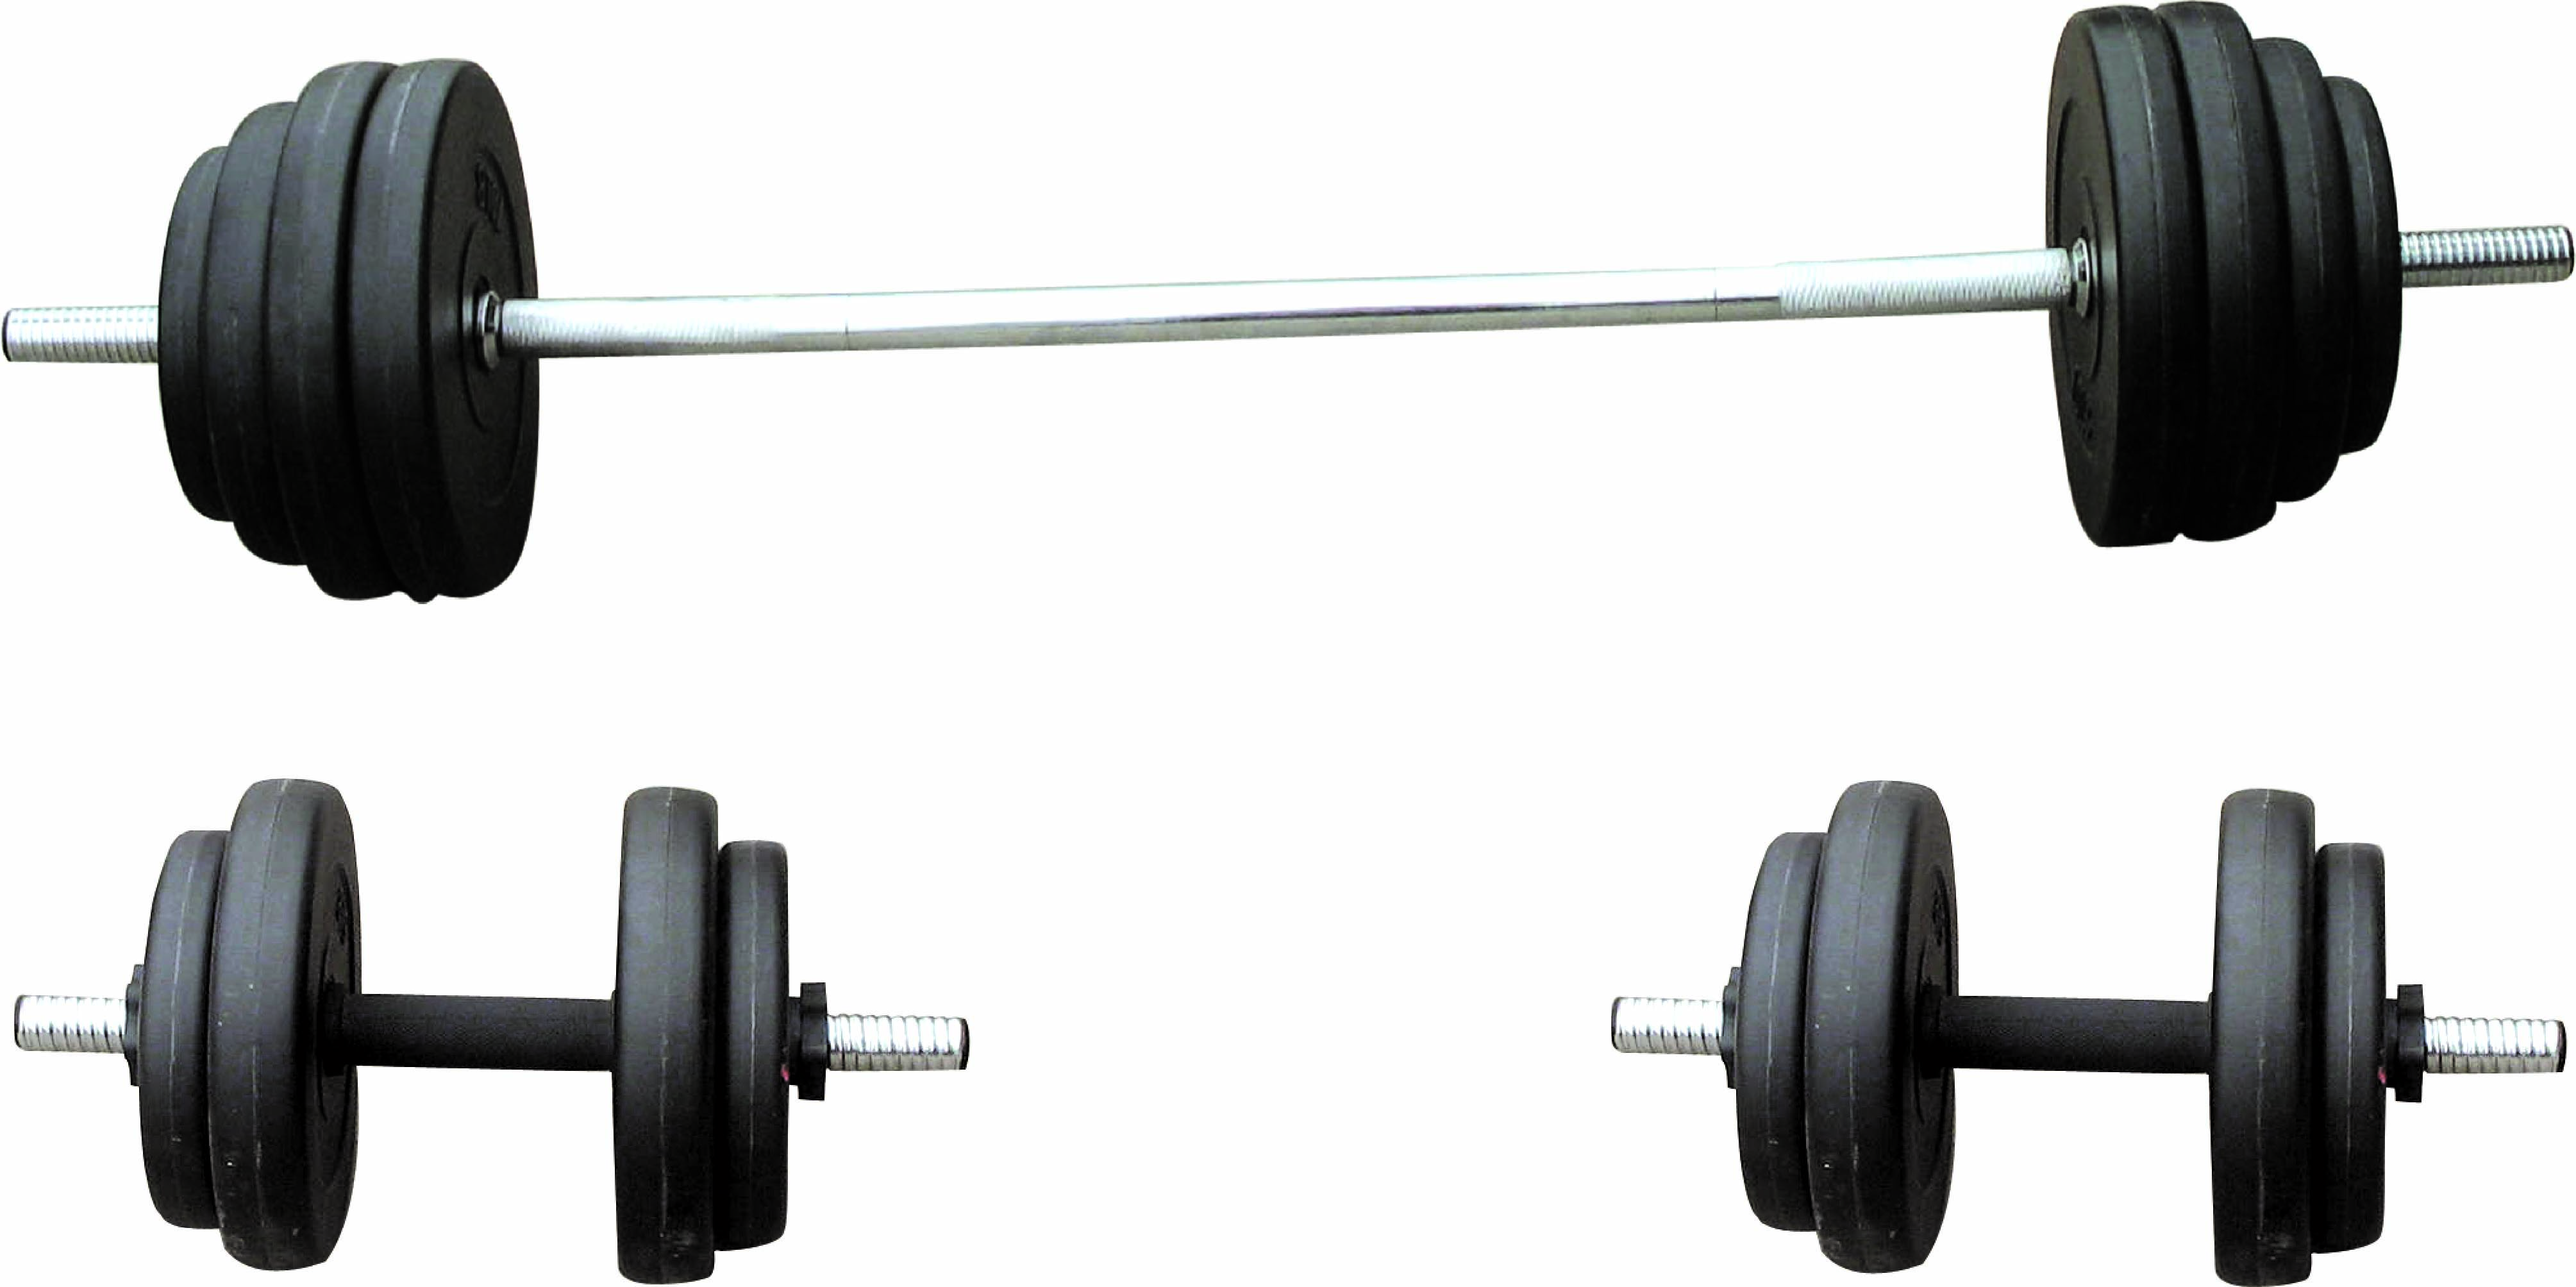 Barbell Images - ClipArt Best